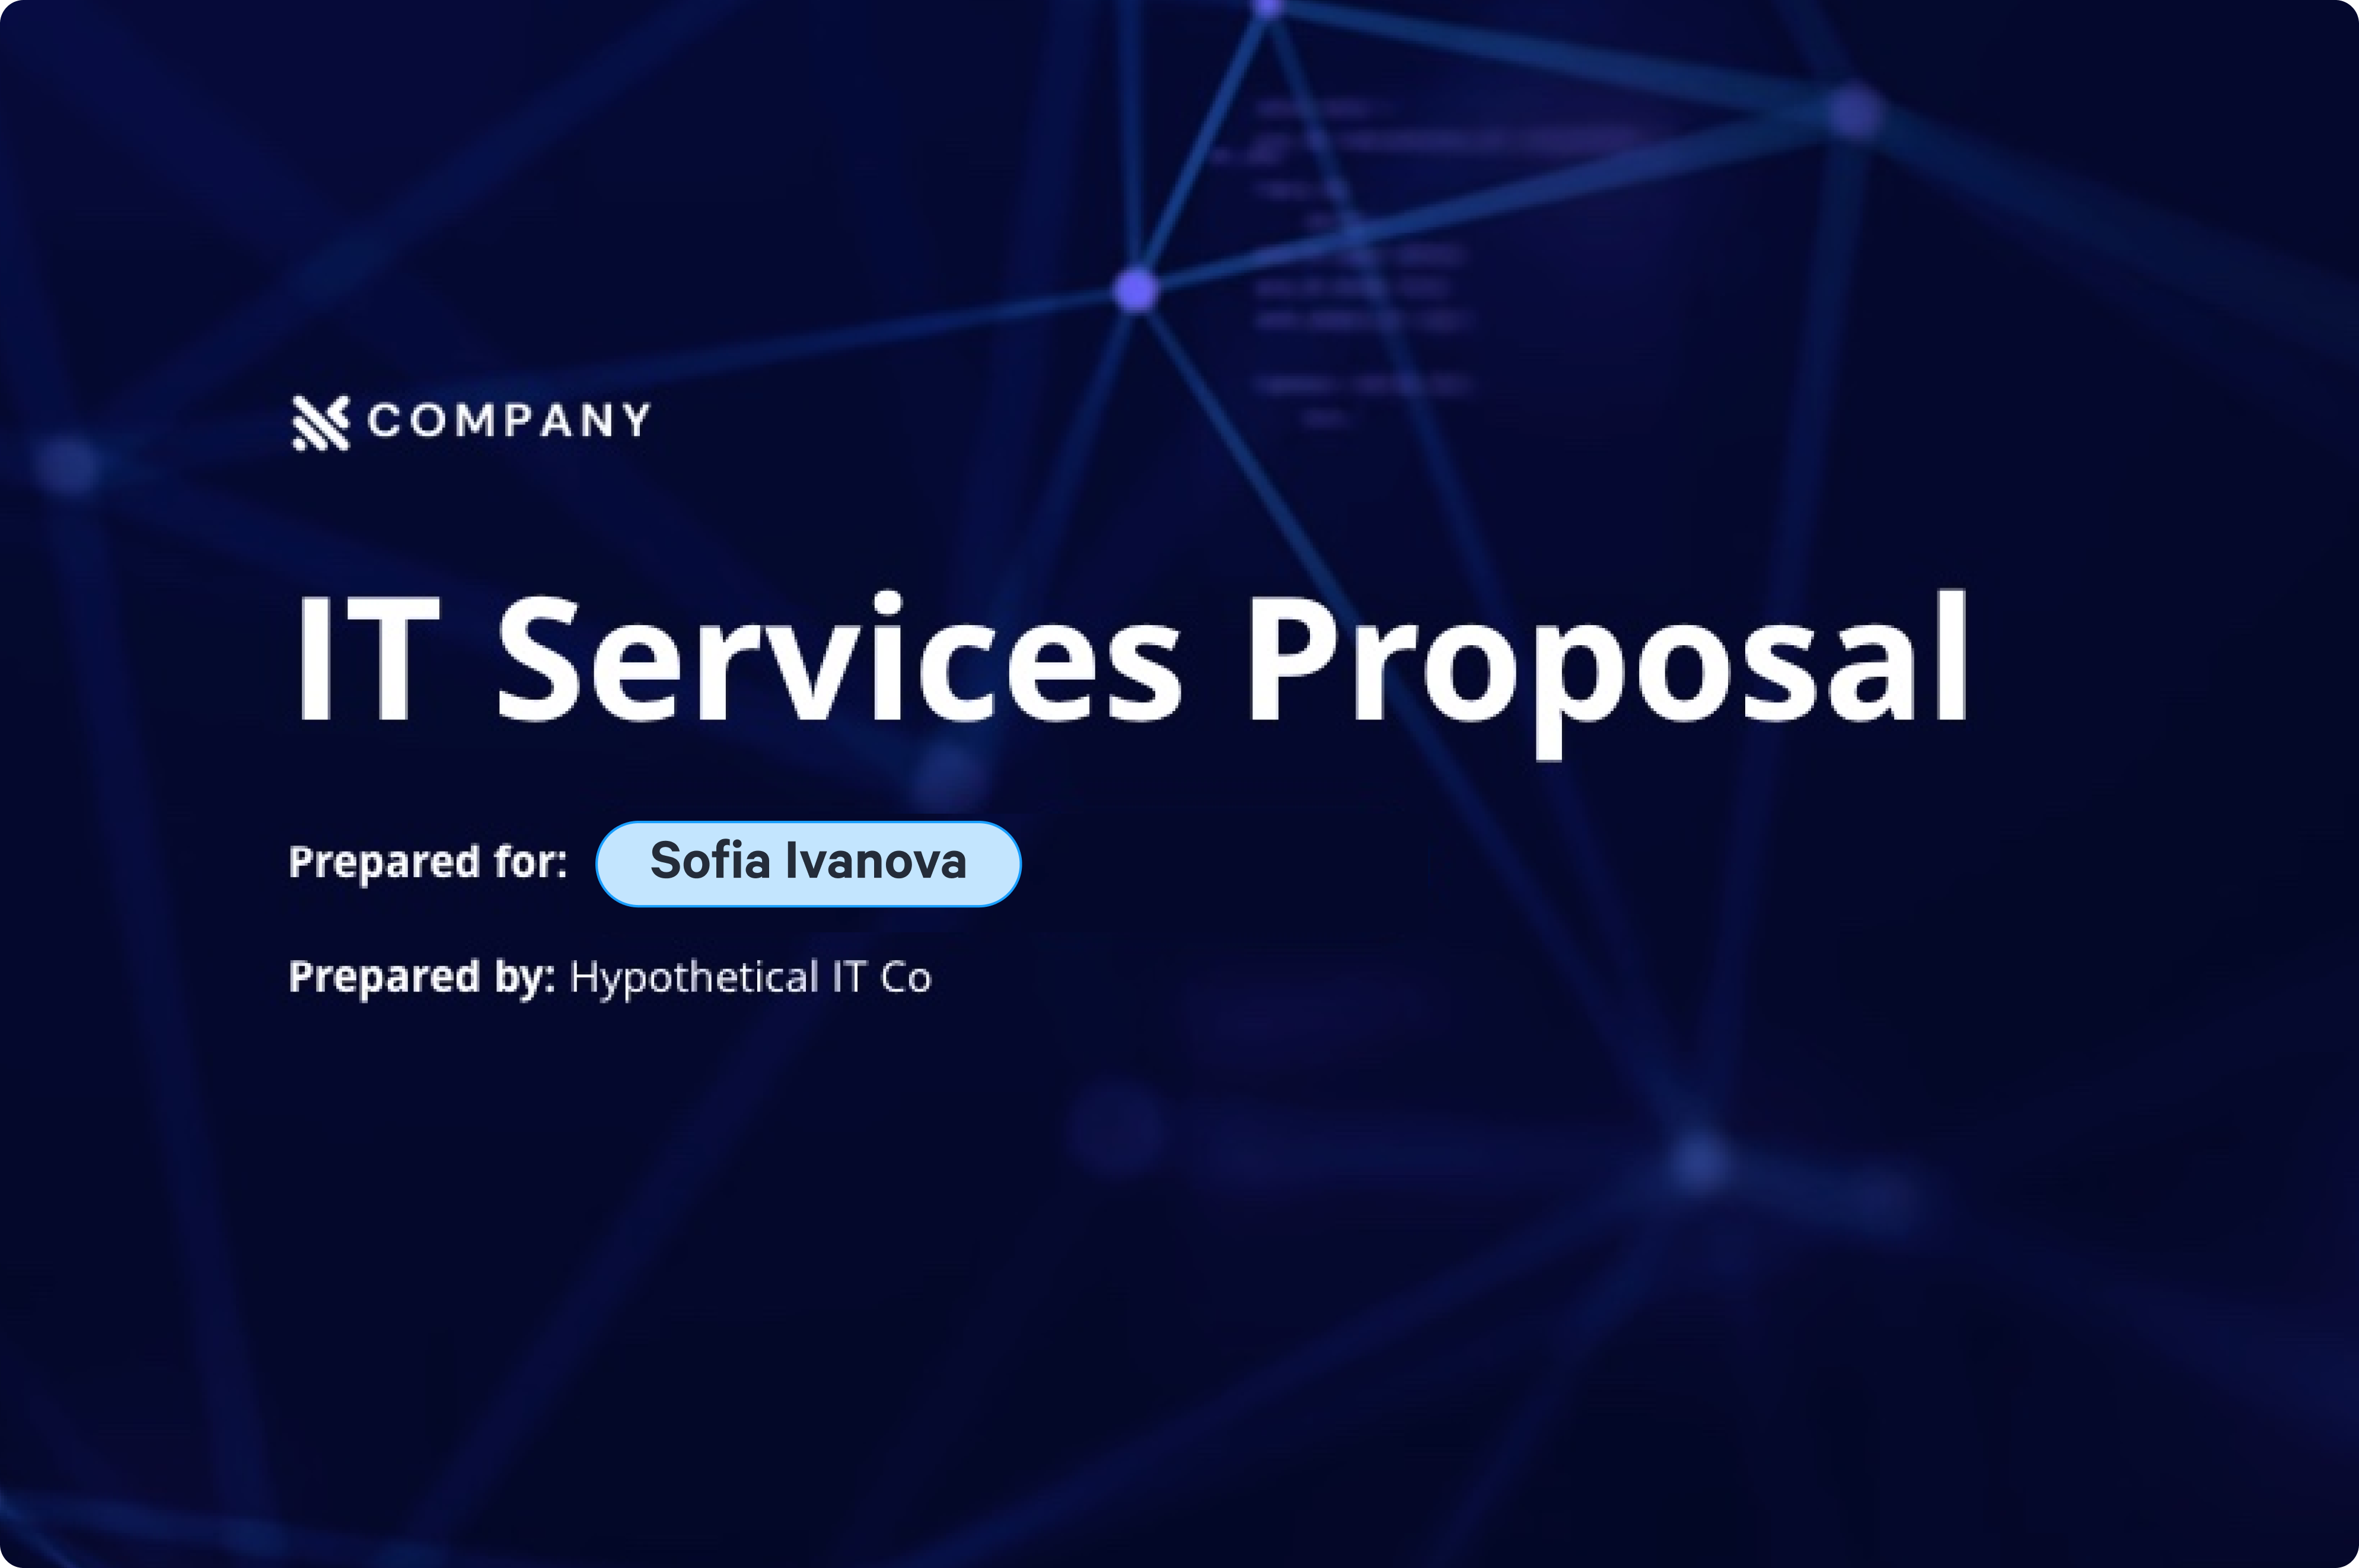 it services proposal prepared for sofia ivanova by hypothetical it co